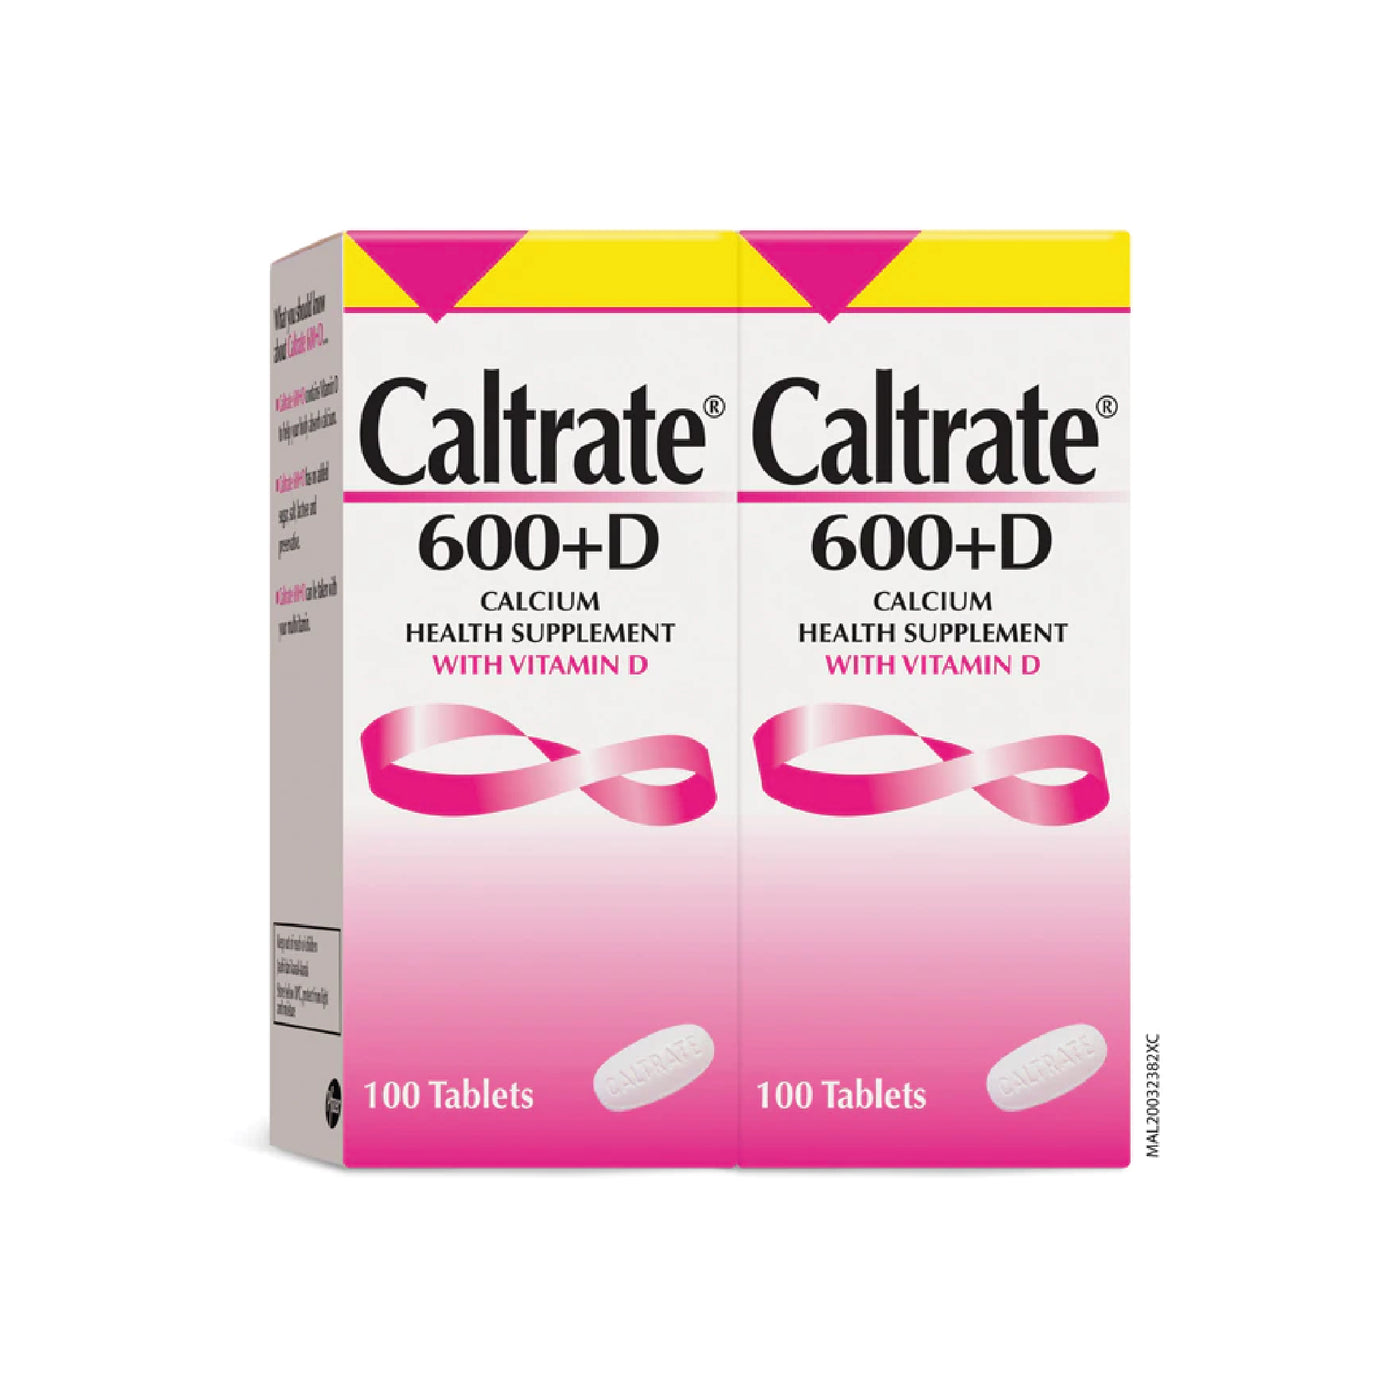 CALTRATE 600+D TABLET 100's